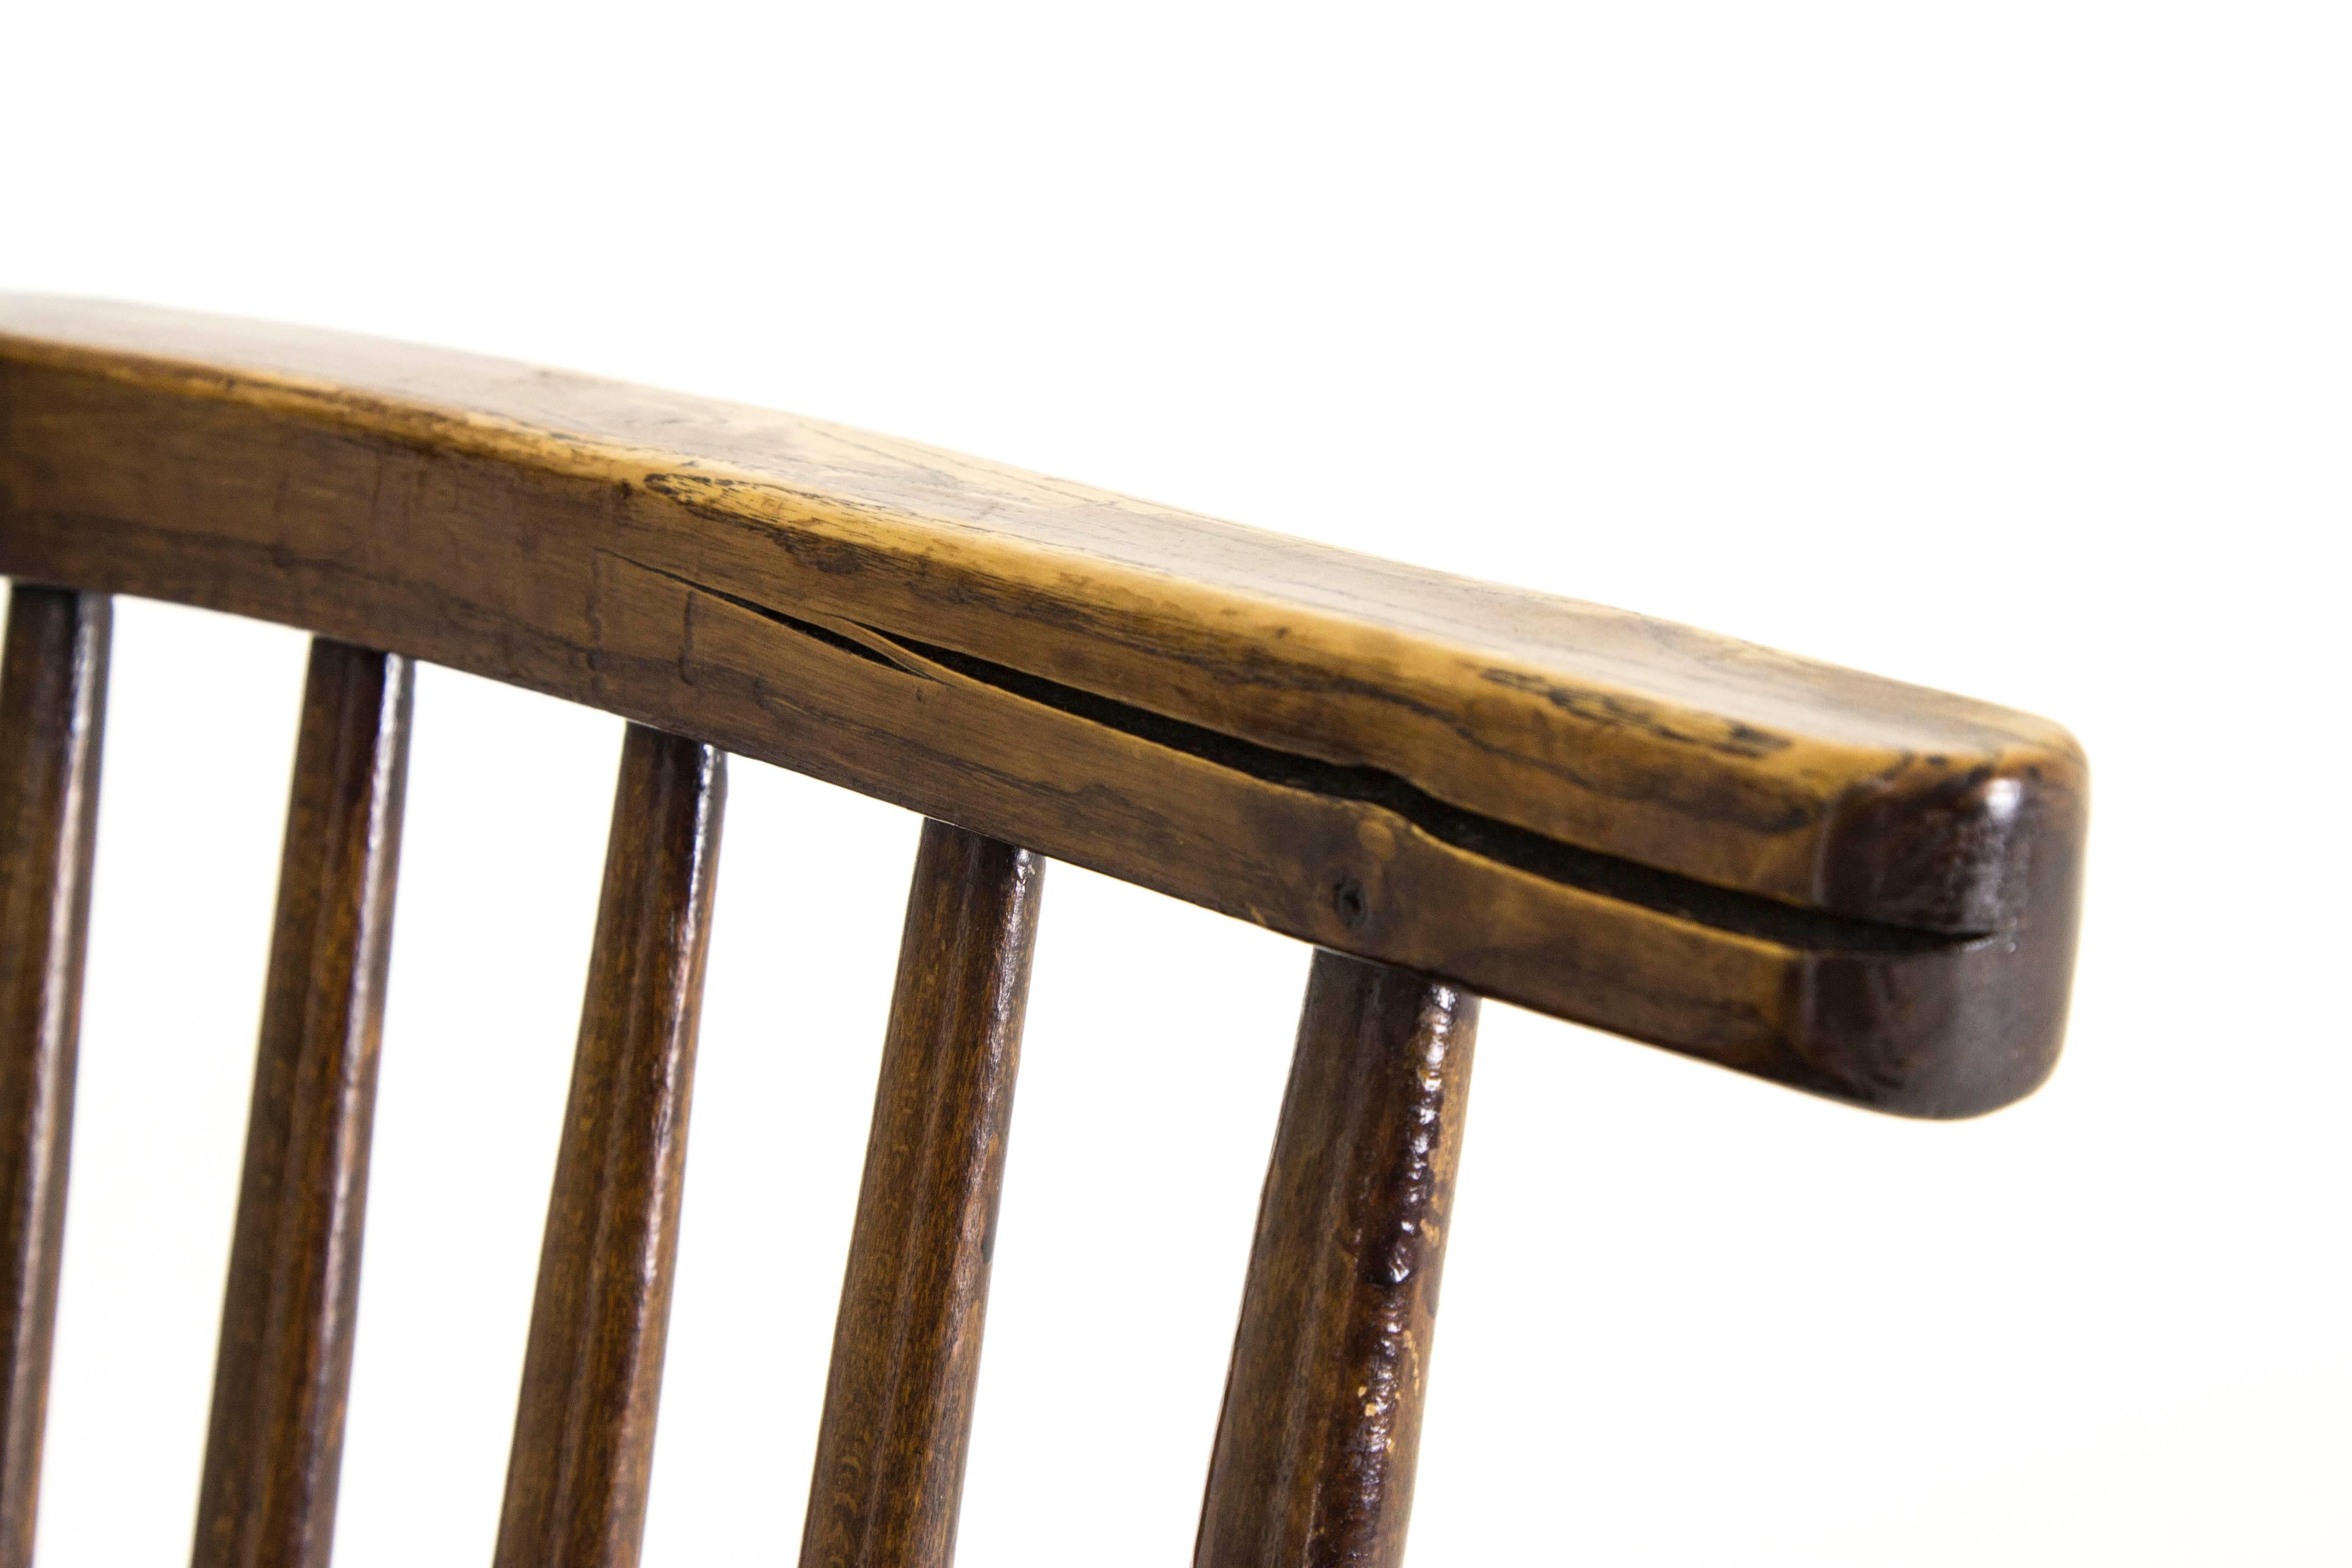 Scotland, 1920
Solid elm construction
Original finish
Bow back with elm spindles
Very comfortable seat, naturally worn with nice patina
All joints are solid

Was $650, now just 520!

B817
Measures: 27